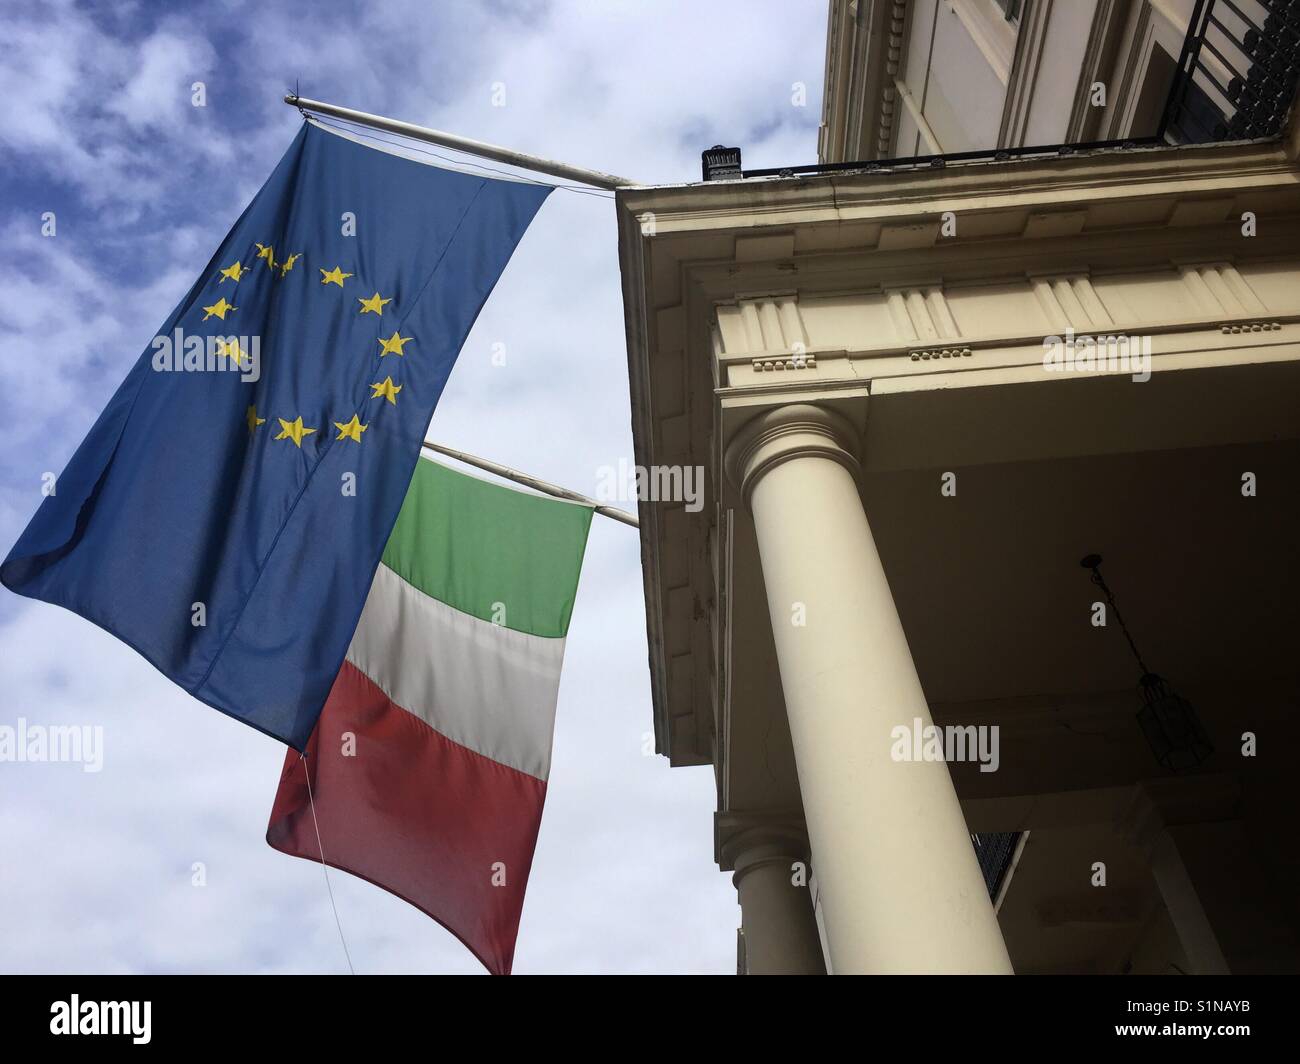 An EU flag flies next to the Italian flag outside a government building in London Stock Photo